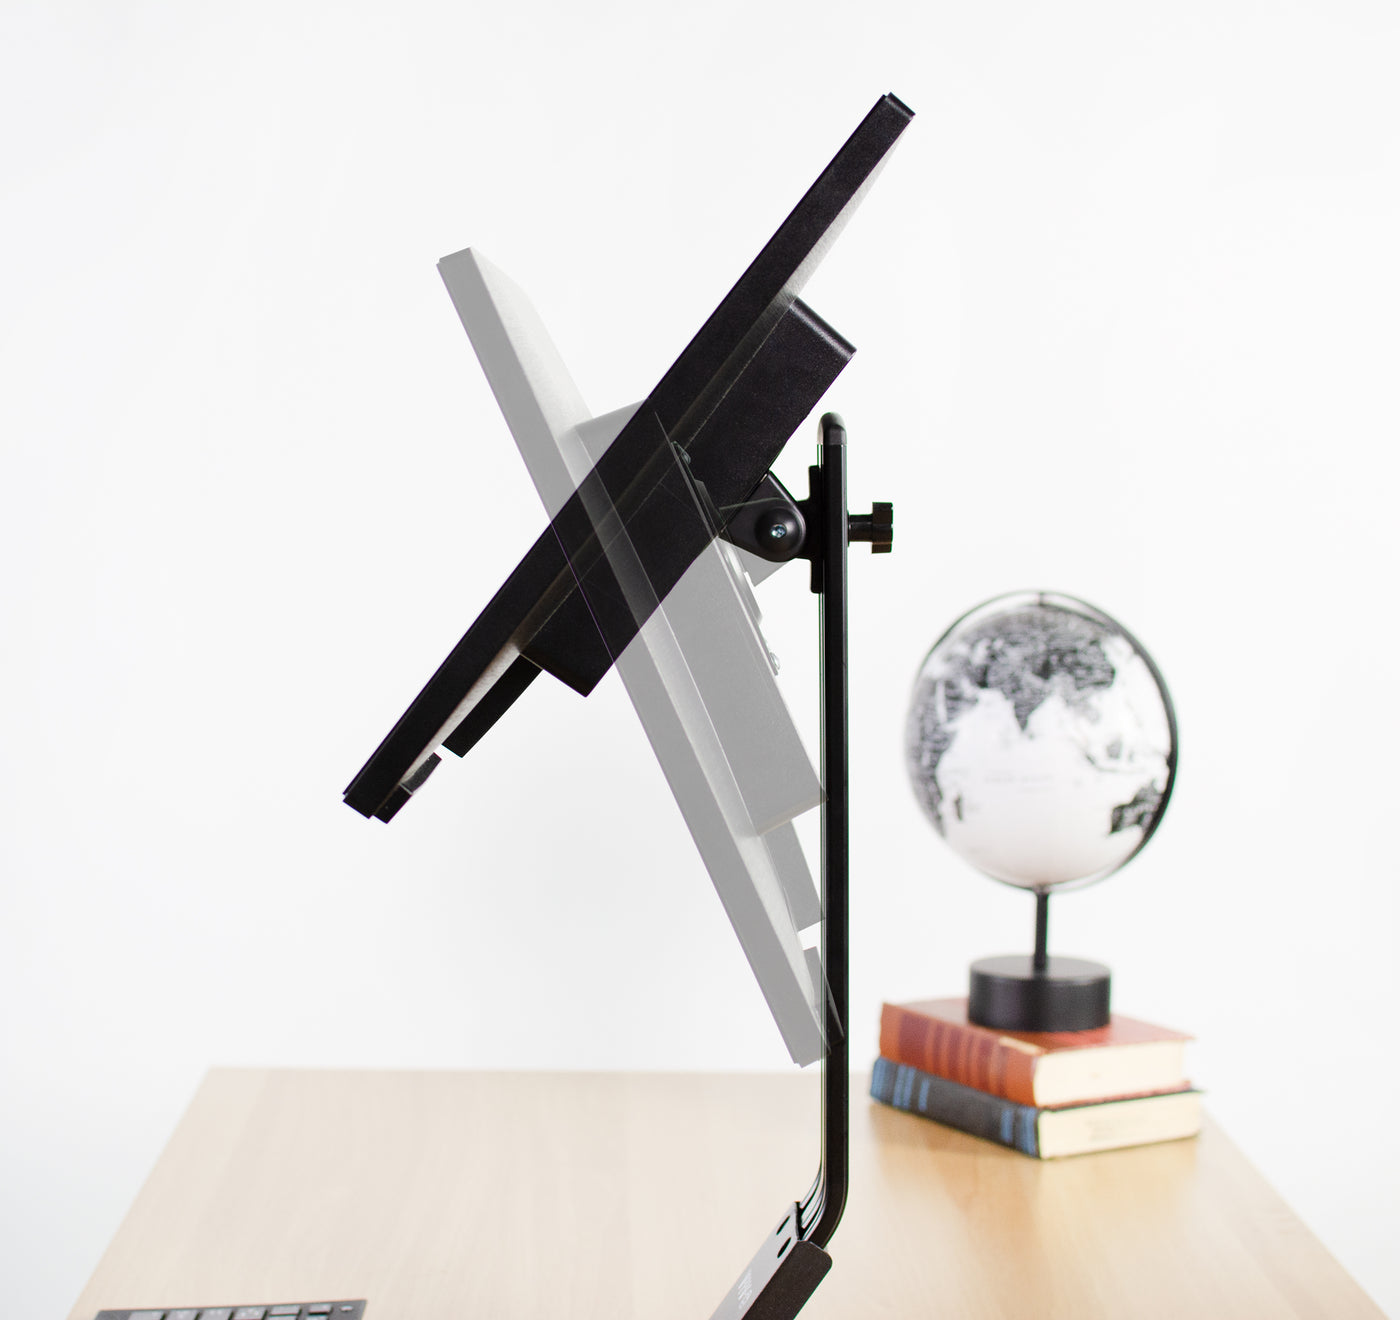 Sturdy yet adjustable top of desk monitor mount stand from VIVO.